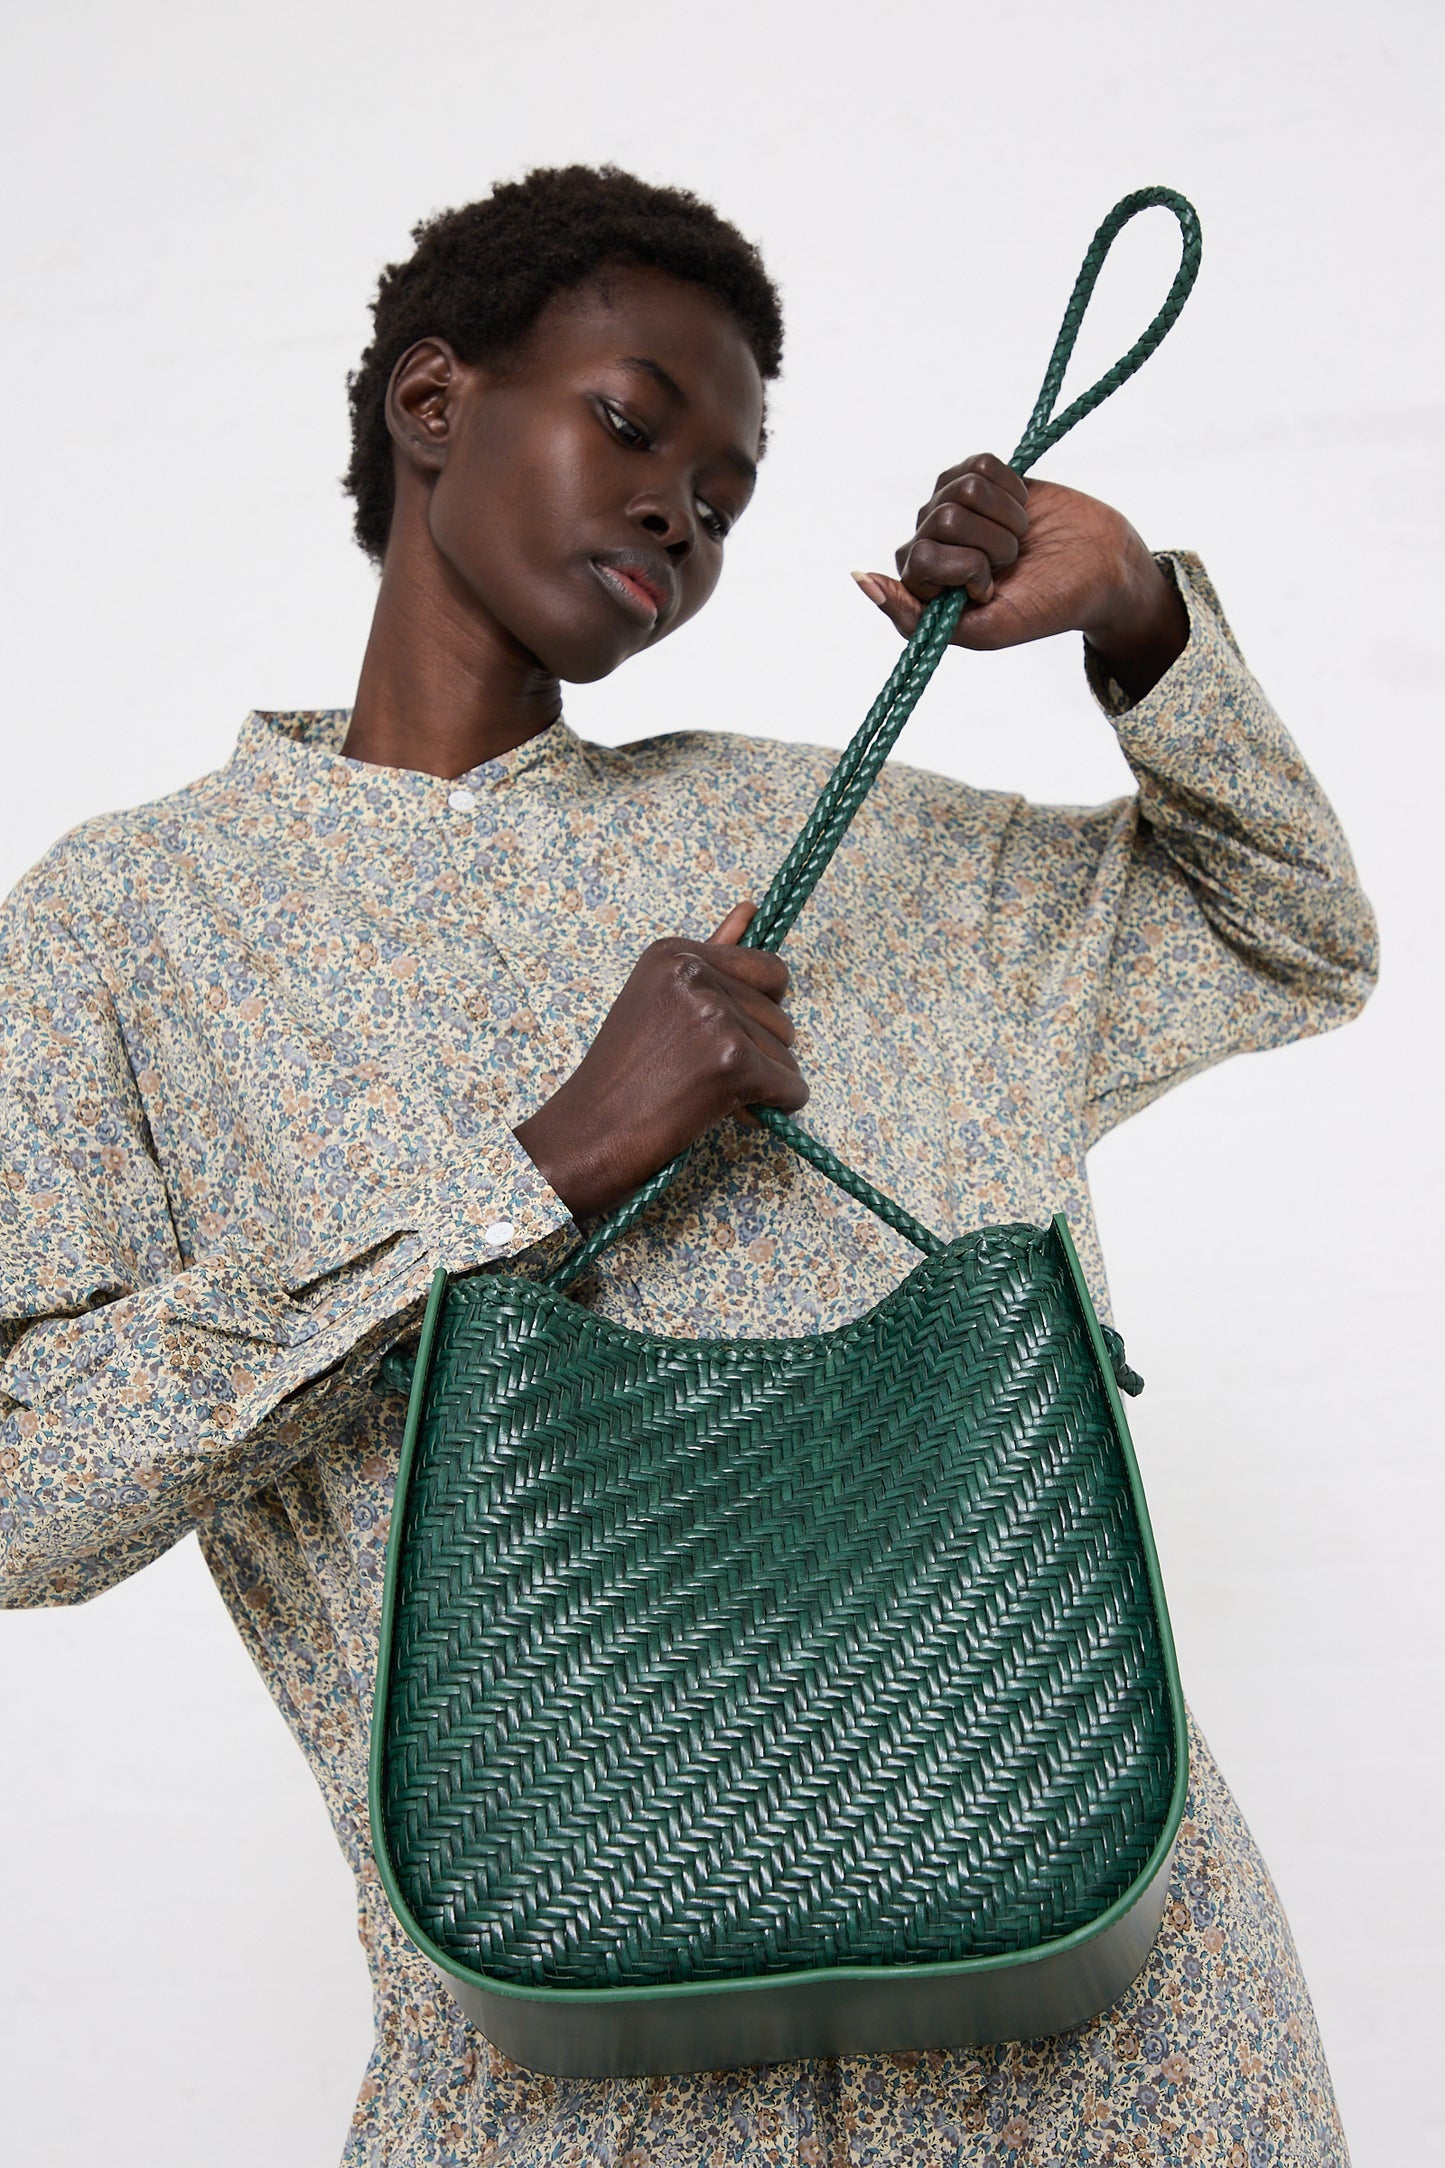 A woman examining a Dragon Diffusion Wanaka in Forest handwoven leather handbag, dressed in a floral print outfit, against a white background.